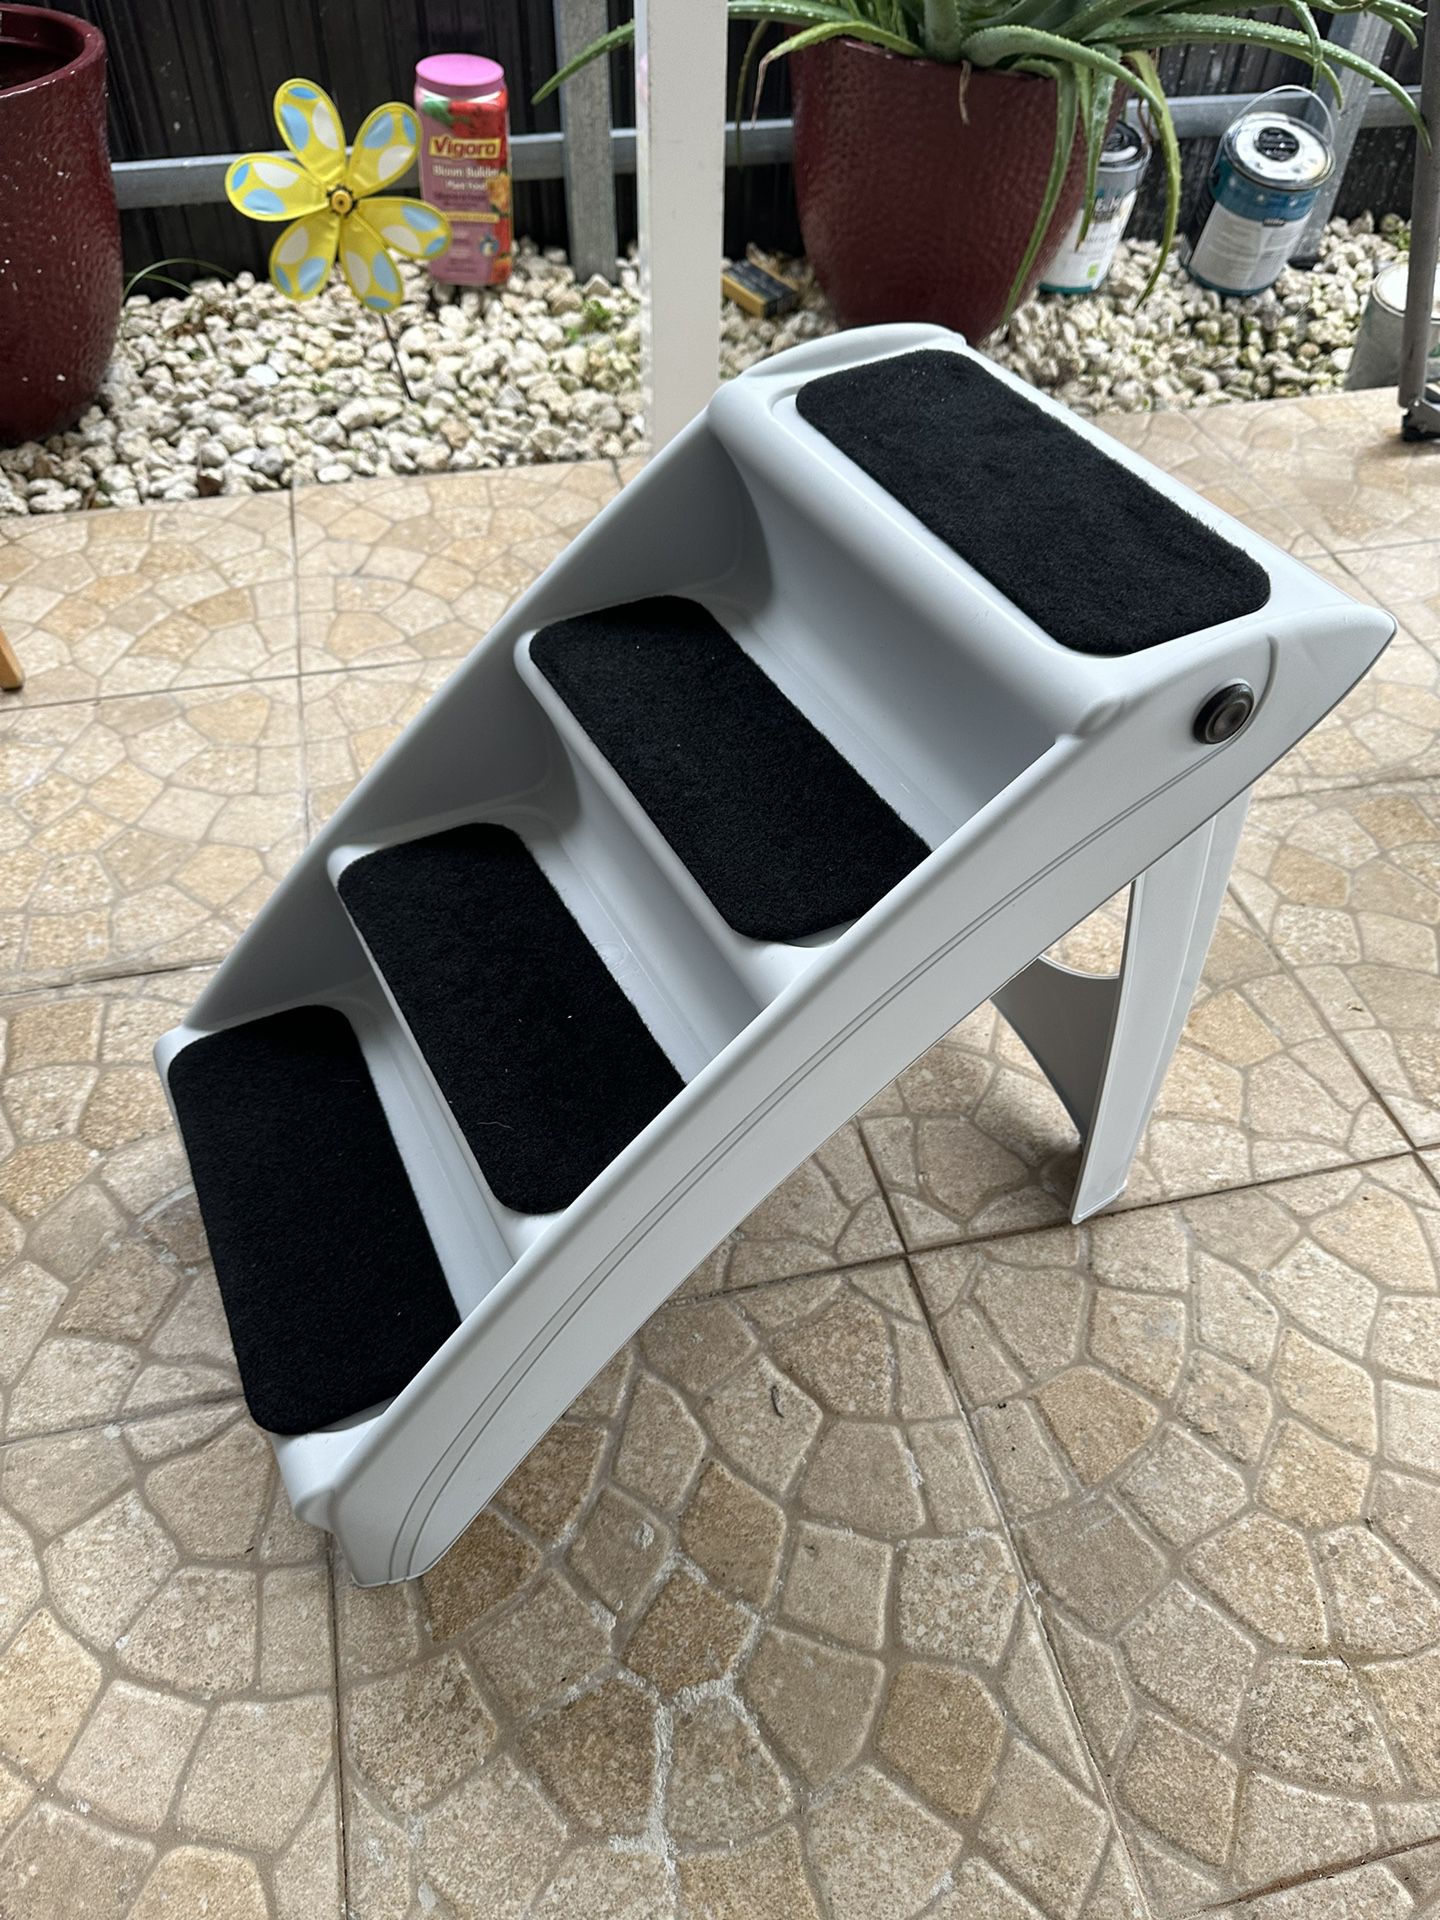 NEW Pet Stairs for Indoor/Outdoor at Home or Travel